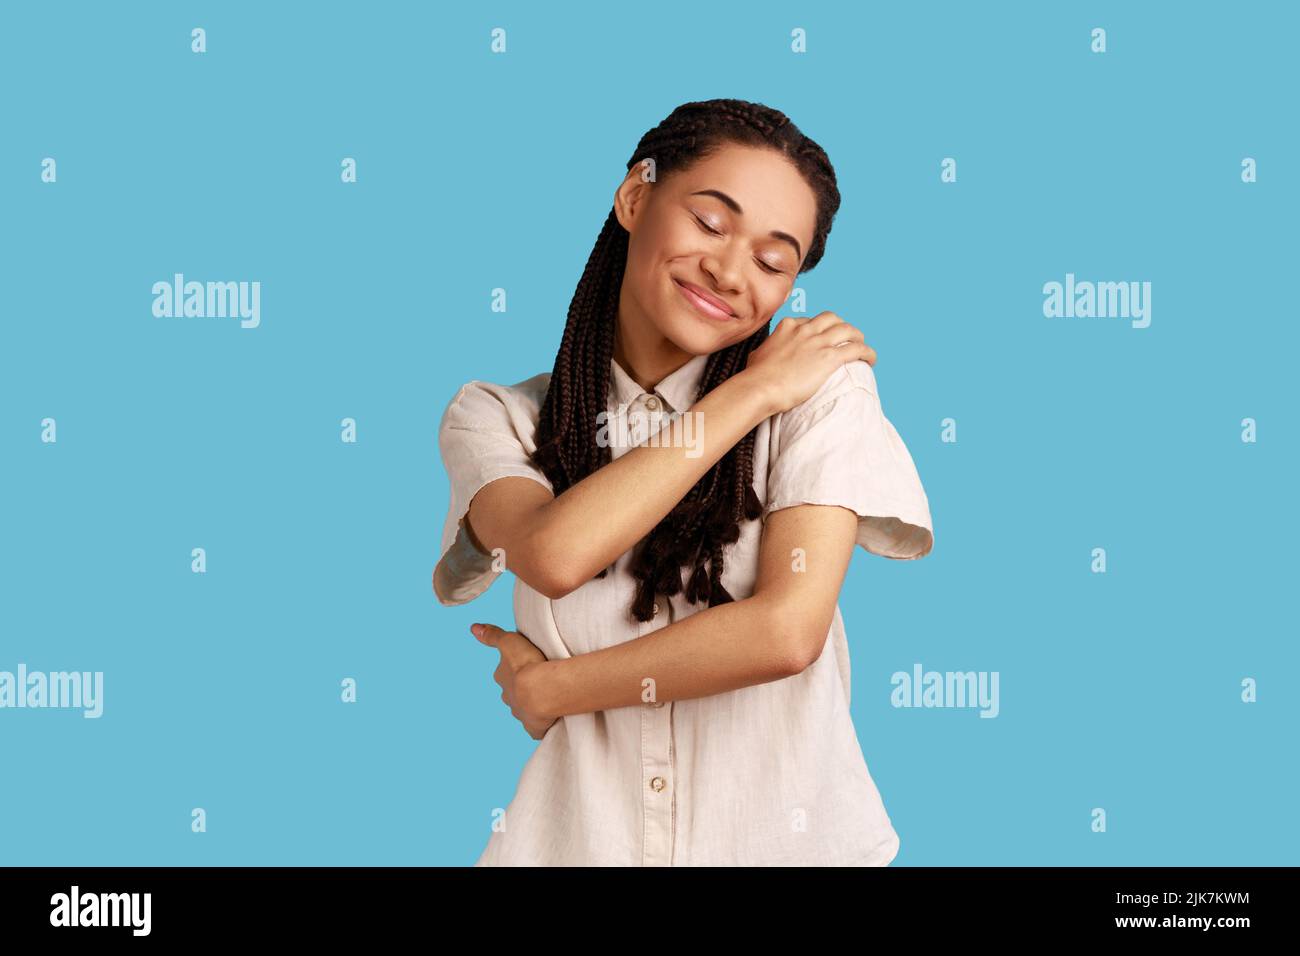 Young cheerful woman with black dreadlocks smiles tenderly, touches shoulders, embraces herself, keeps eyes closed, wearing white shirt. Indoor studio shot isolated on blue background. Stock Photo